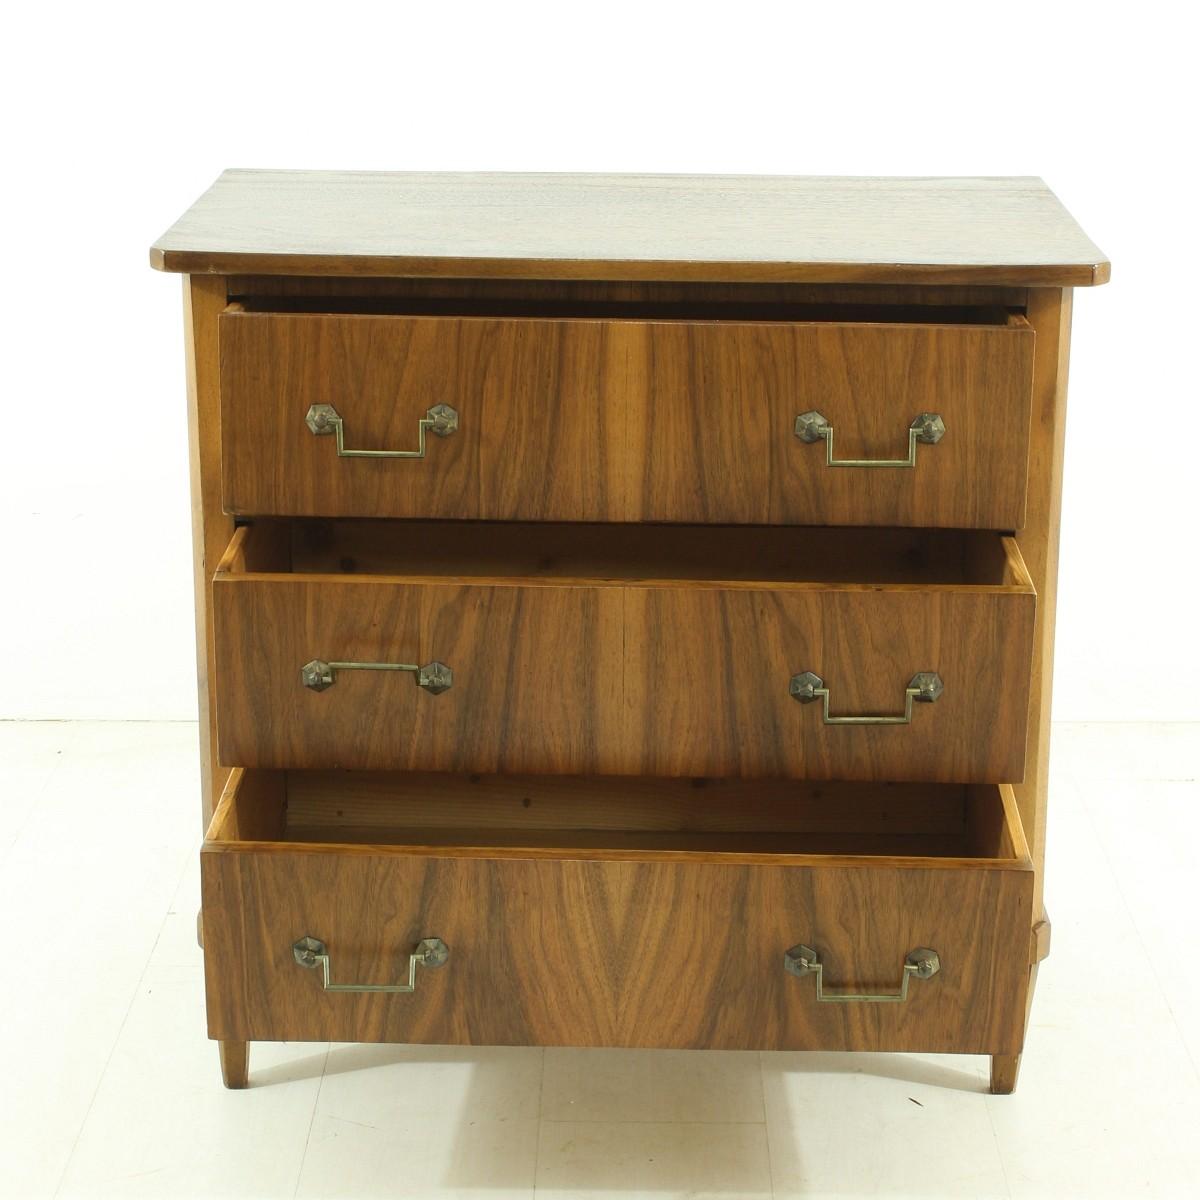 German Small Antique Chest of Drawers, circa 1930